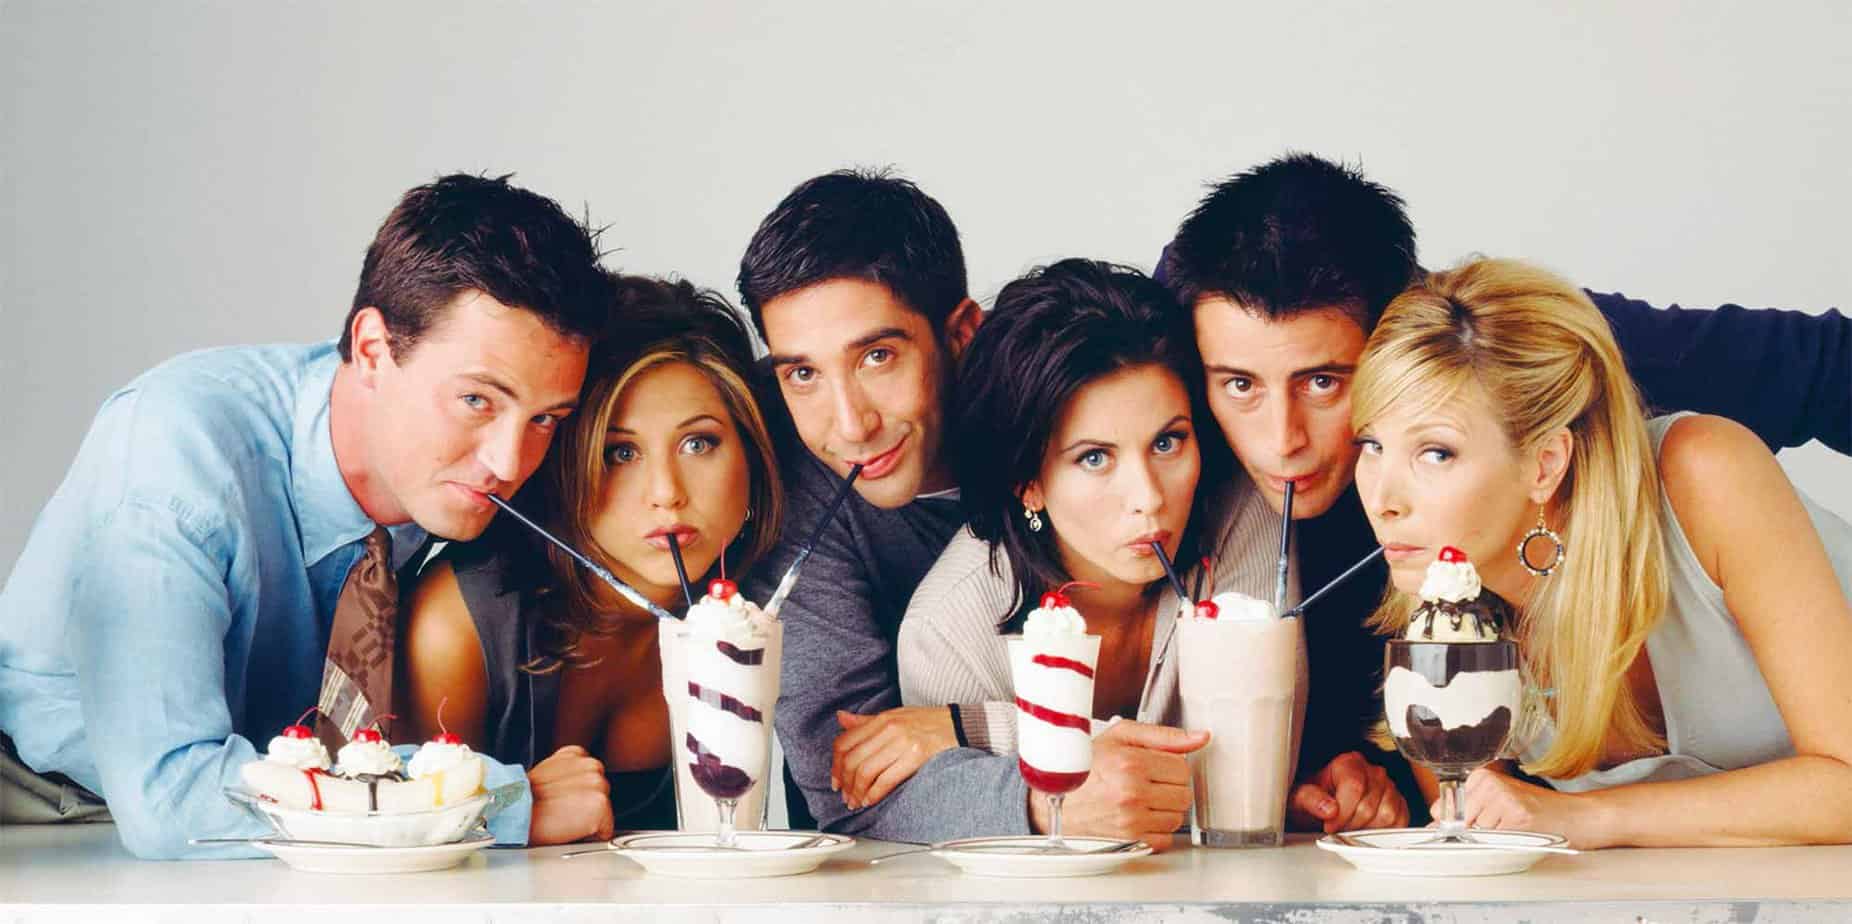 cast of friends television show eating icecream and drinking milkshakes